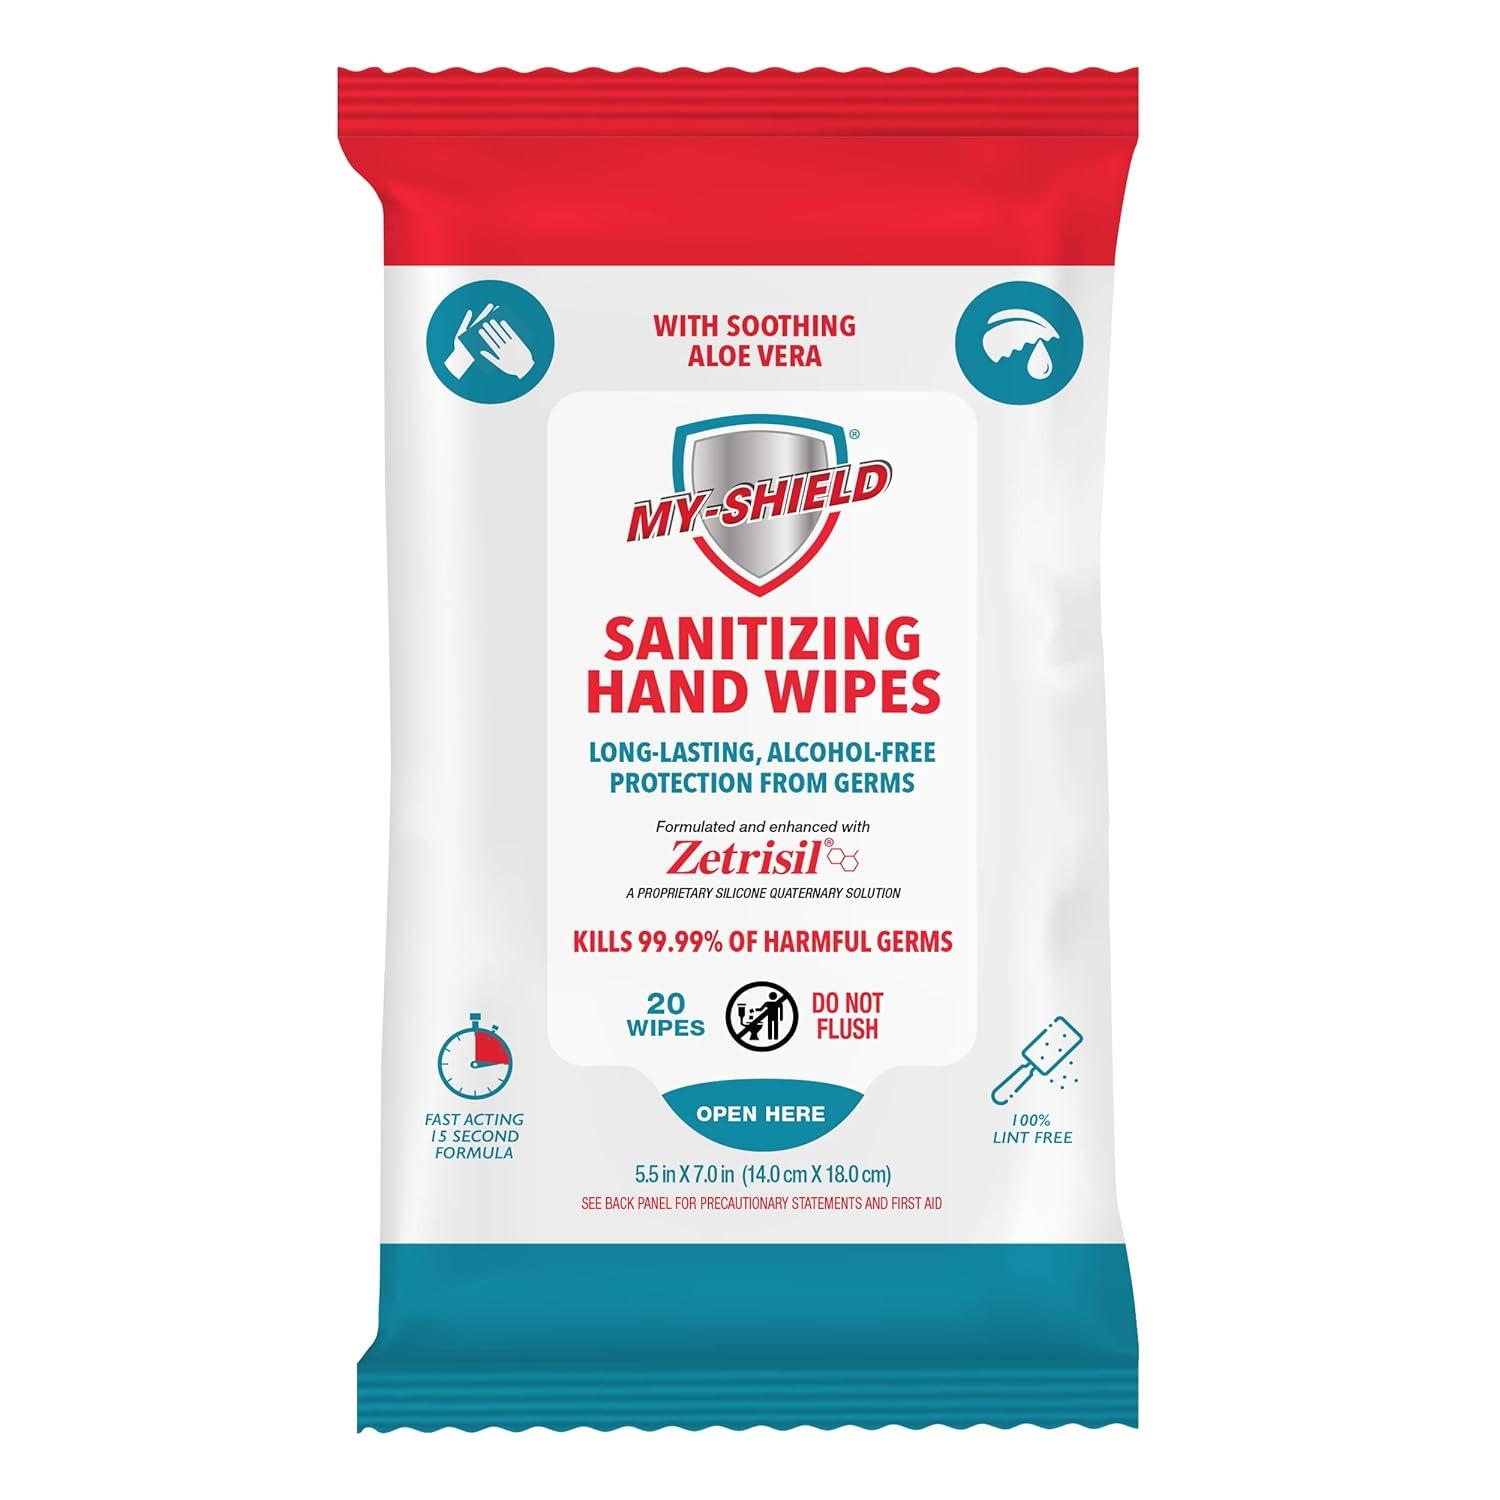 My-Shield Sanitizing Hand Wipes - Travel Pack - 20 Count (4-pack